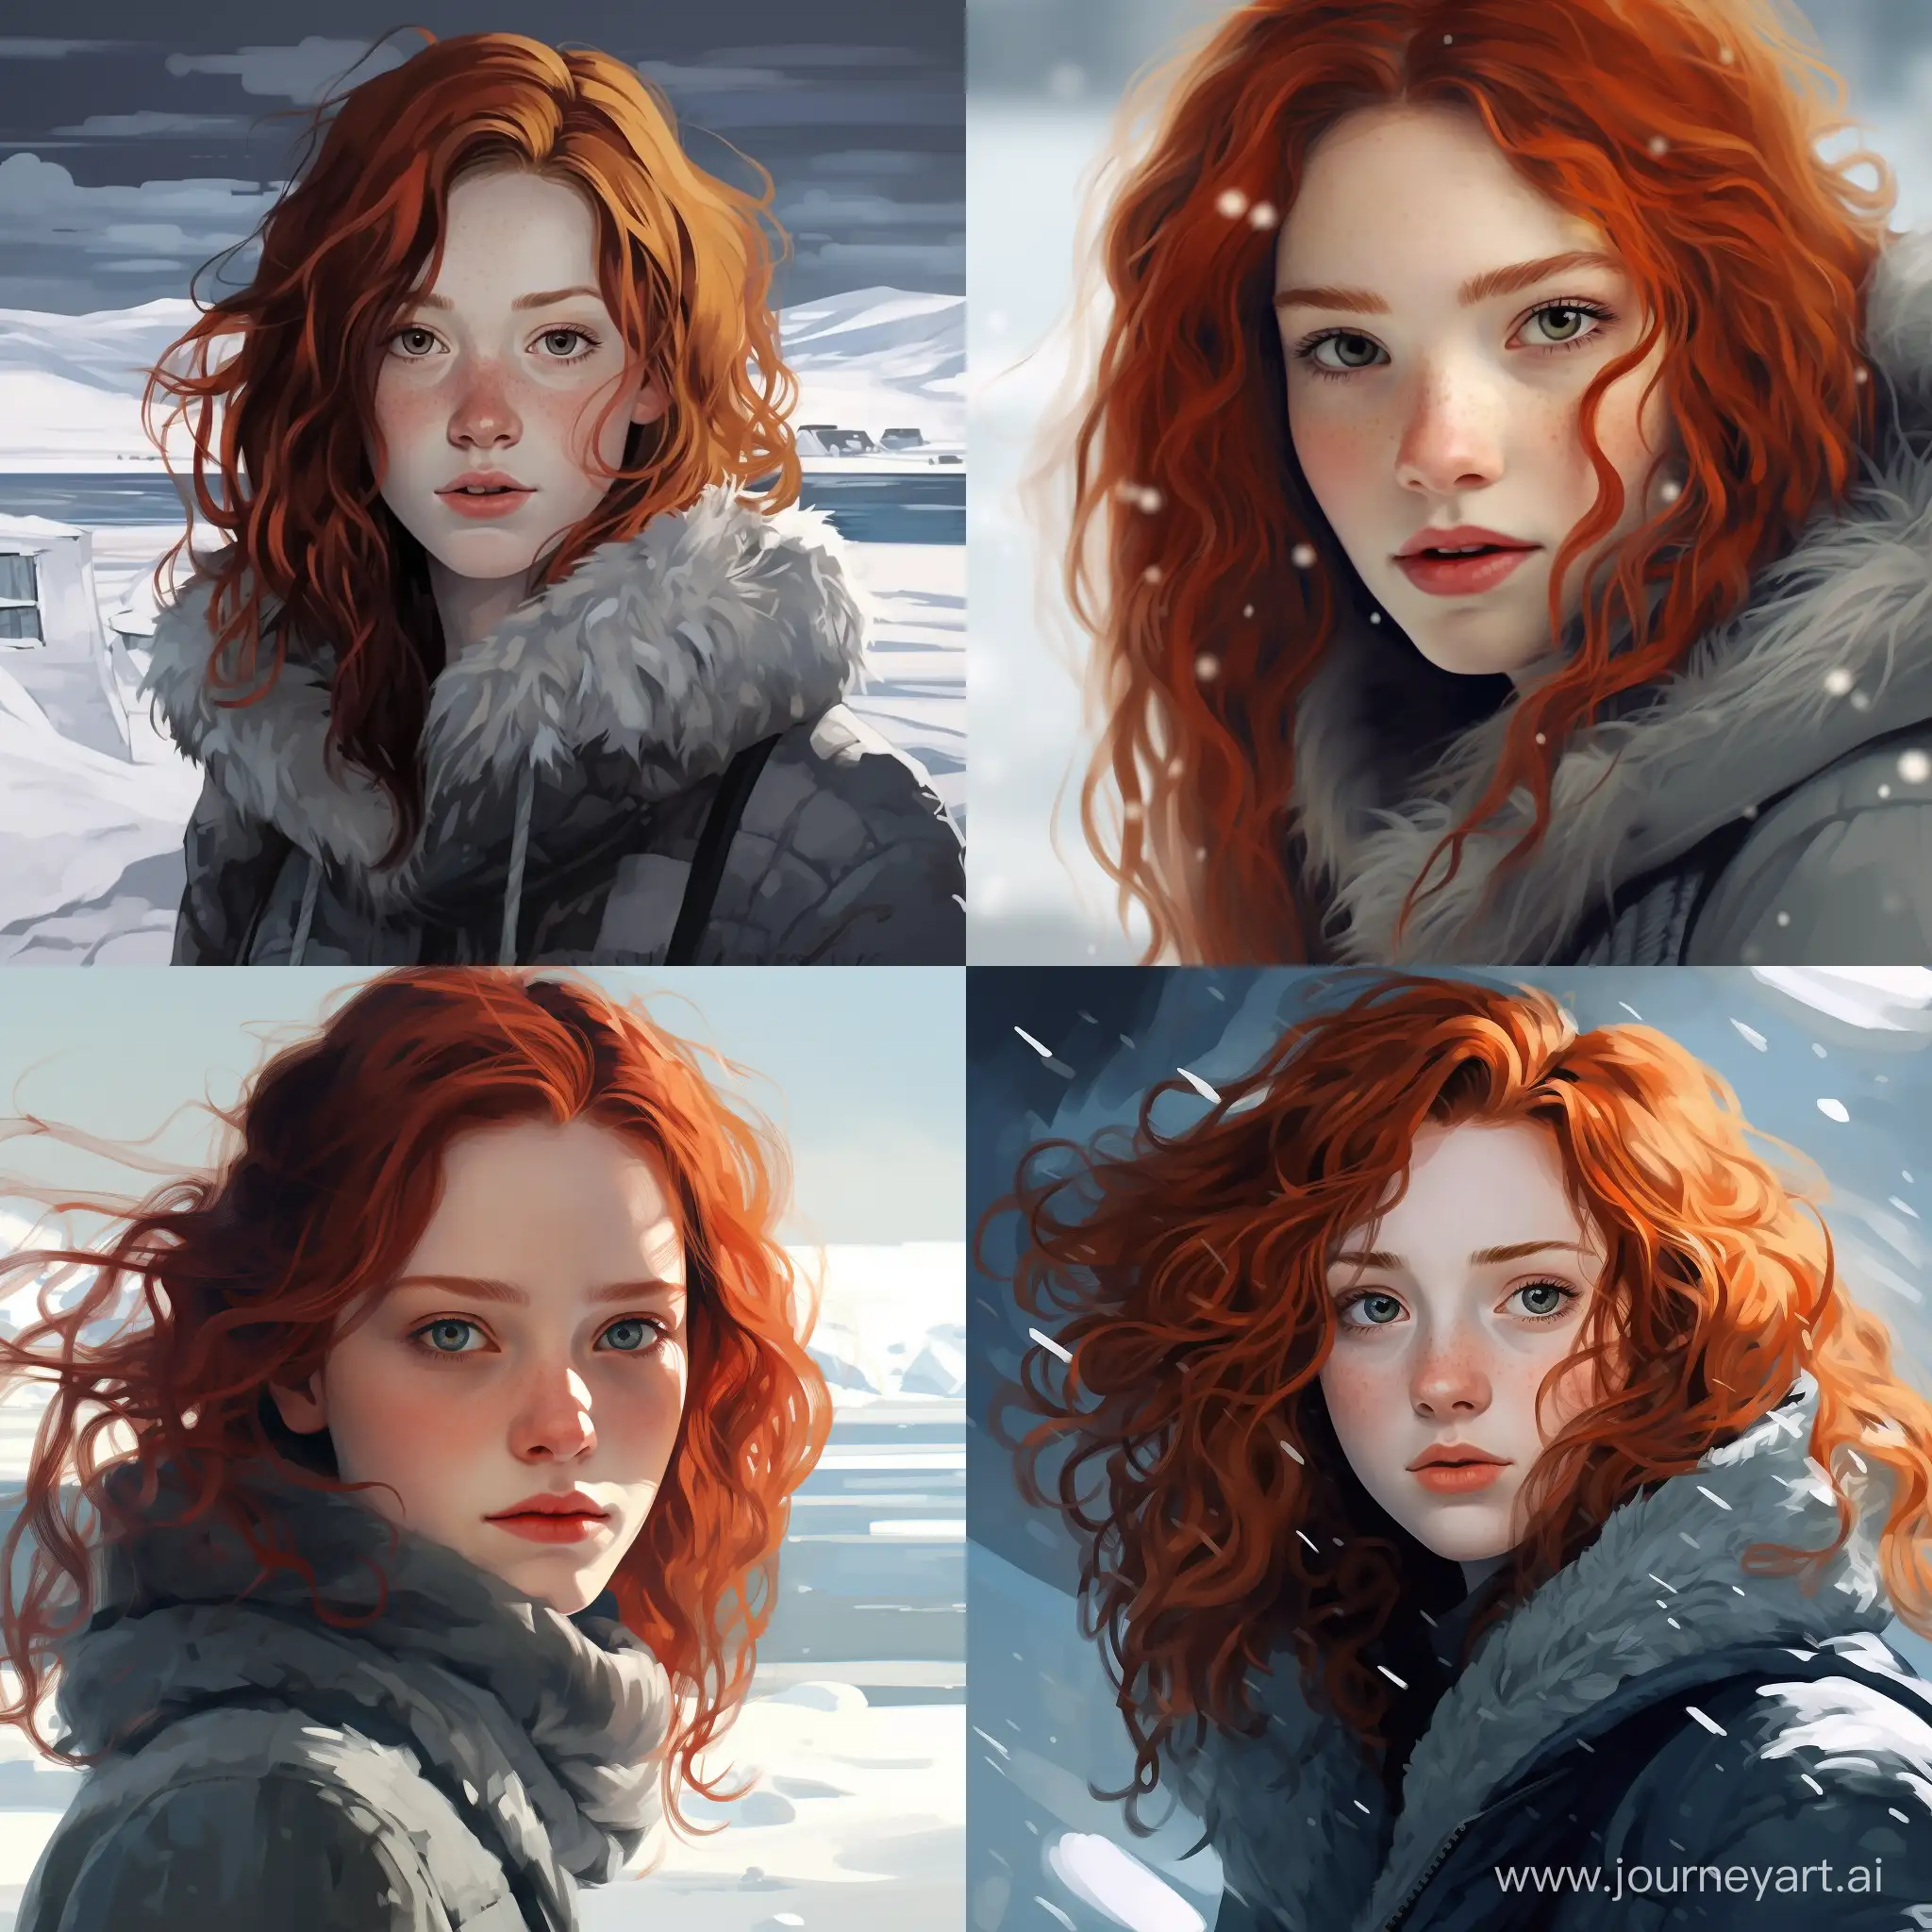 Antarctic-Winter-CurlyHaired-Teenager-Soaked-in-HighQuality-Cartoon-Art